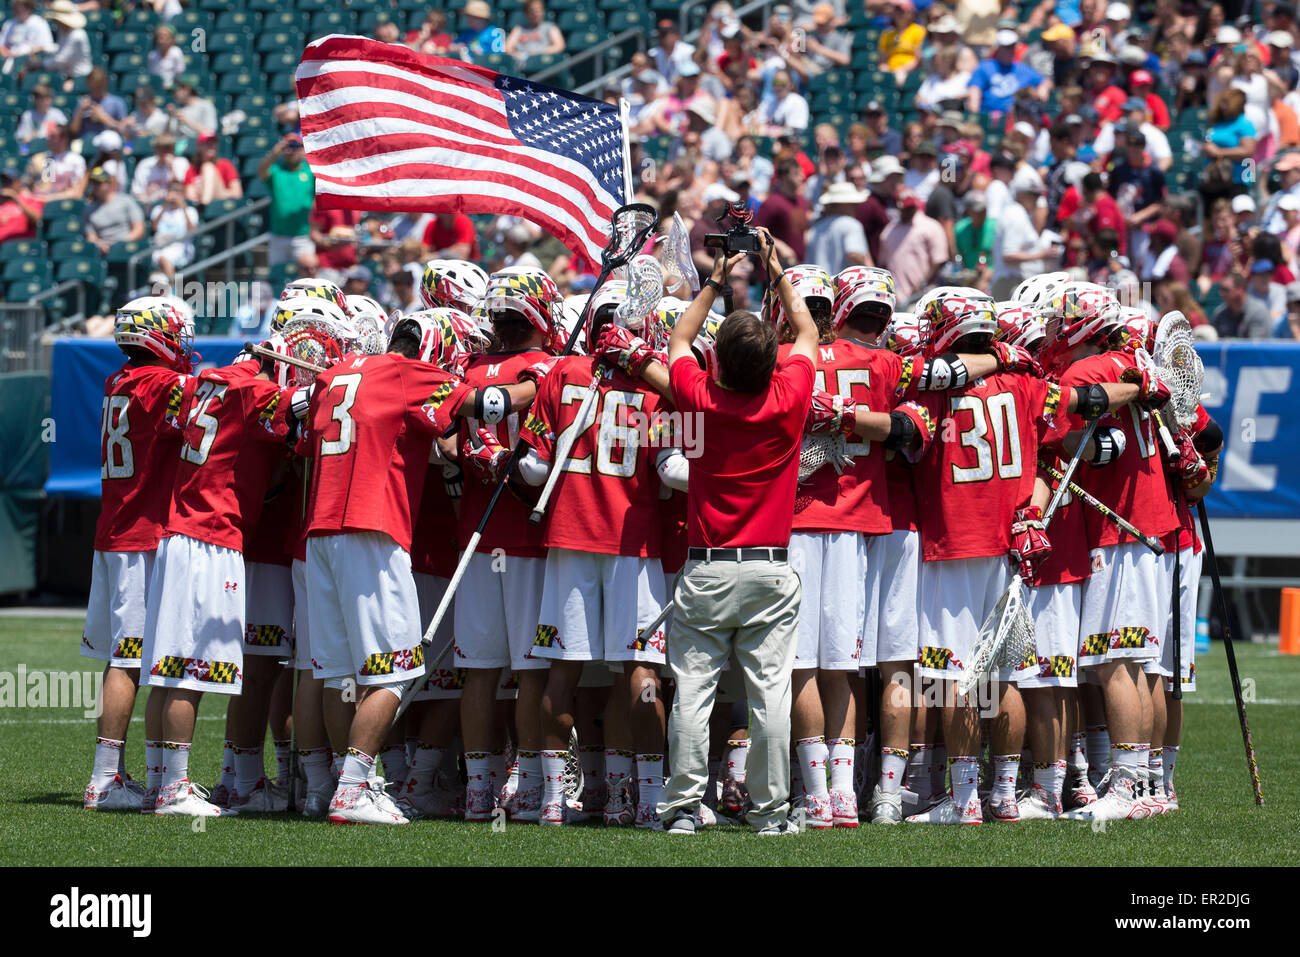 May 25, 2015: Maryland Terrapins huddle up prior to the championship in the NCAA Division I men's lacrosse tournament between the Maryland Terrapins and the Denver Pioneers at Lincoln Financial Field in Philadelphia, Pennsylvania. Christopher Szagola/CSM Stock Photo